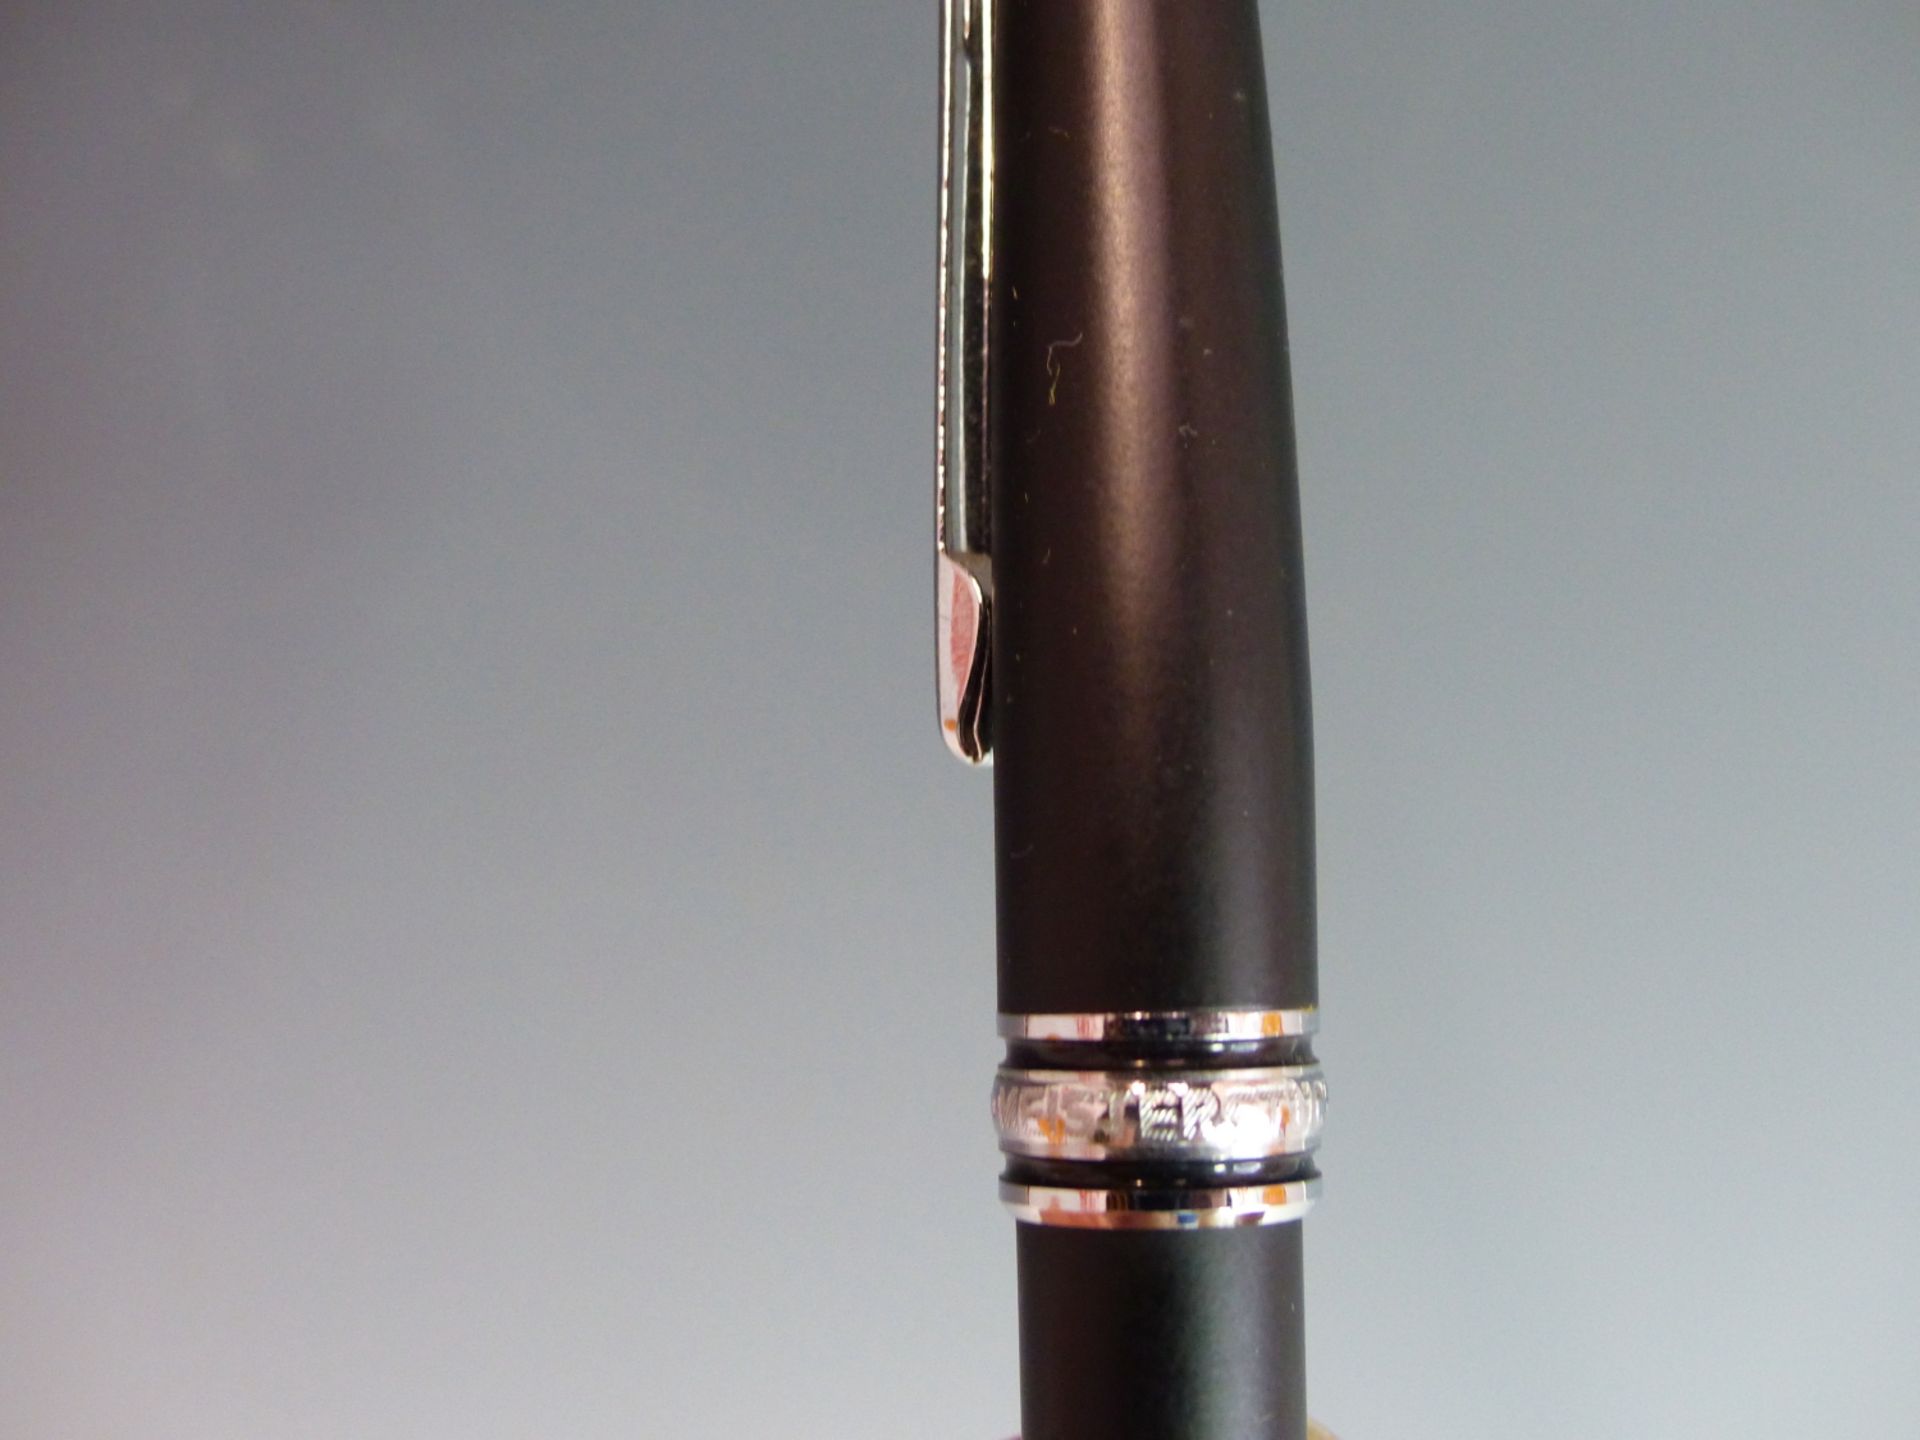 A MONT BLANC MEISTERSTUCK BALL POINT PEN. THE CAP BAND INSCRIBED 75 YEARS OF PASSION. - Image 4 of 5